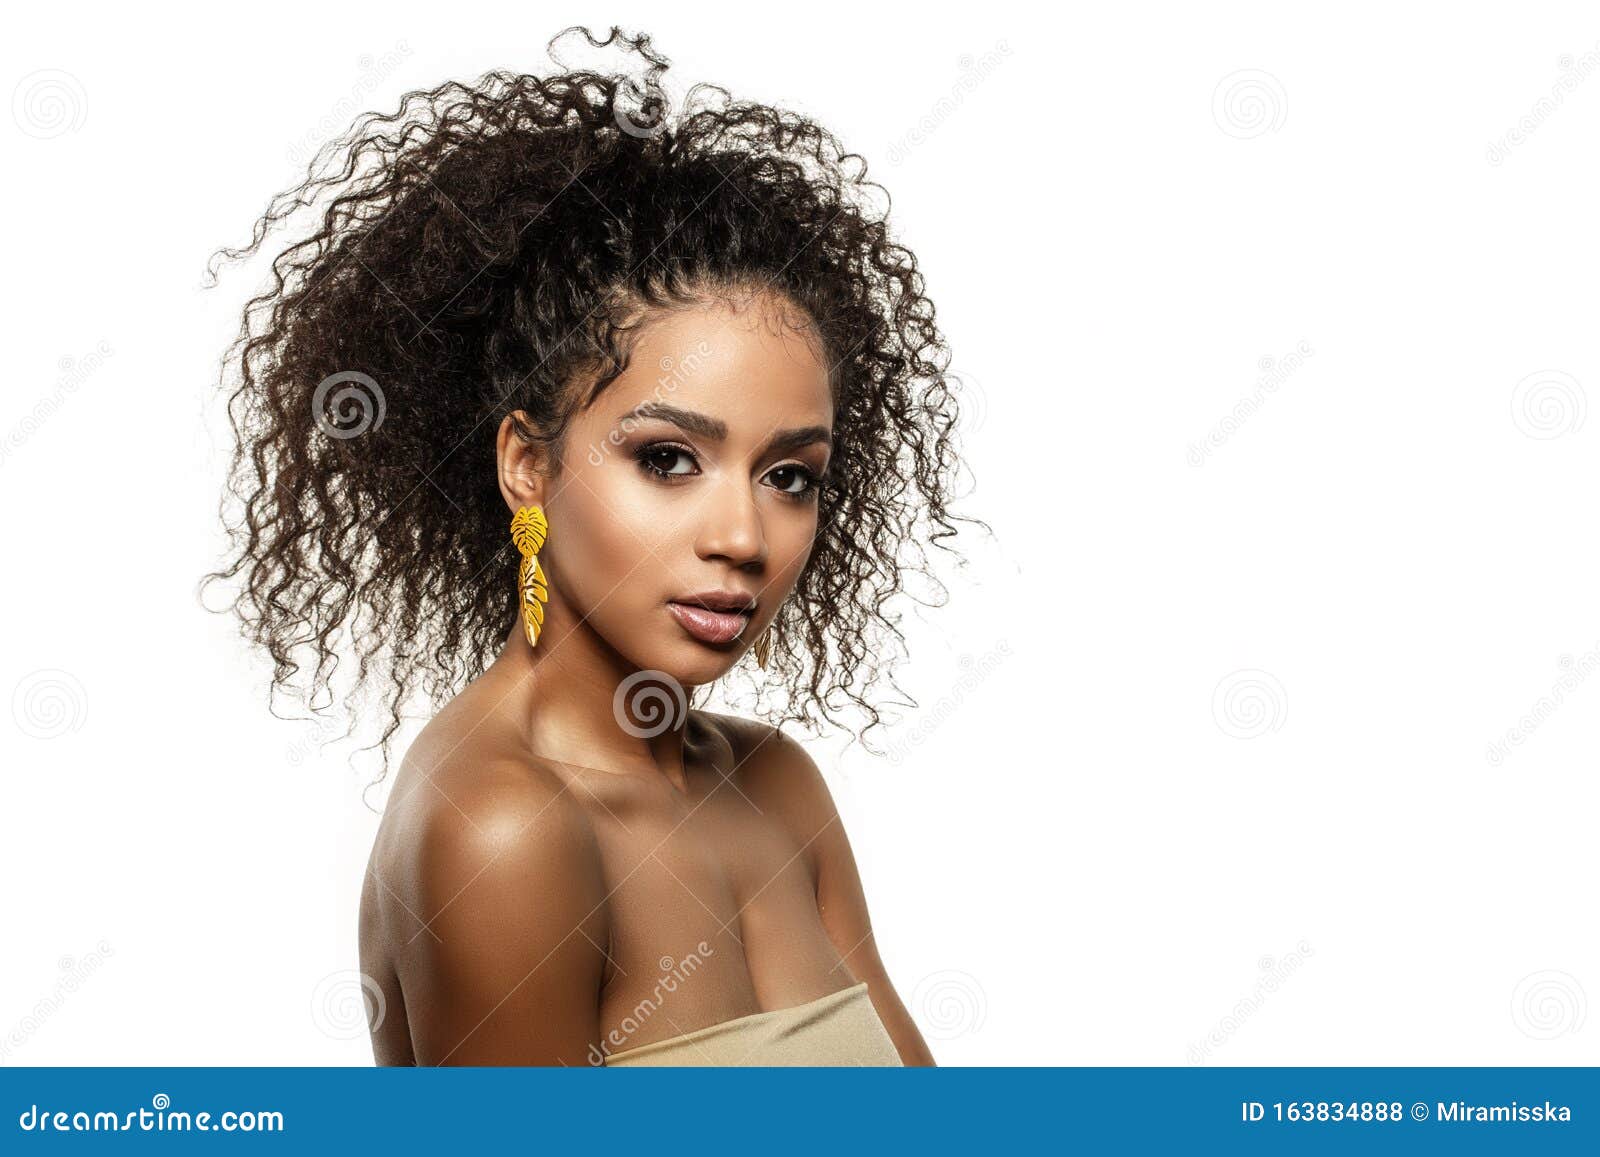 beauty black skin woman fashion african ethnic female face portrait. young girl model with afro